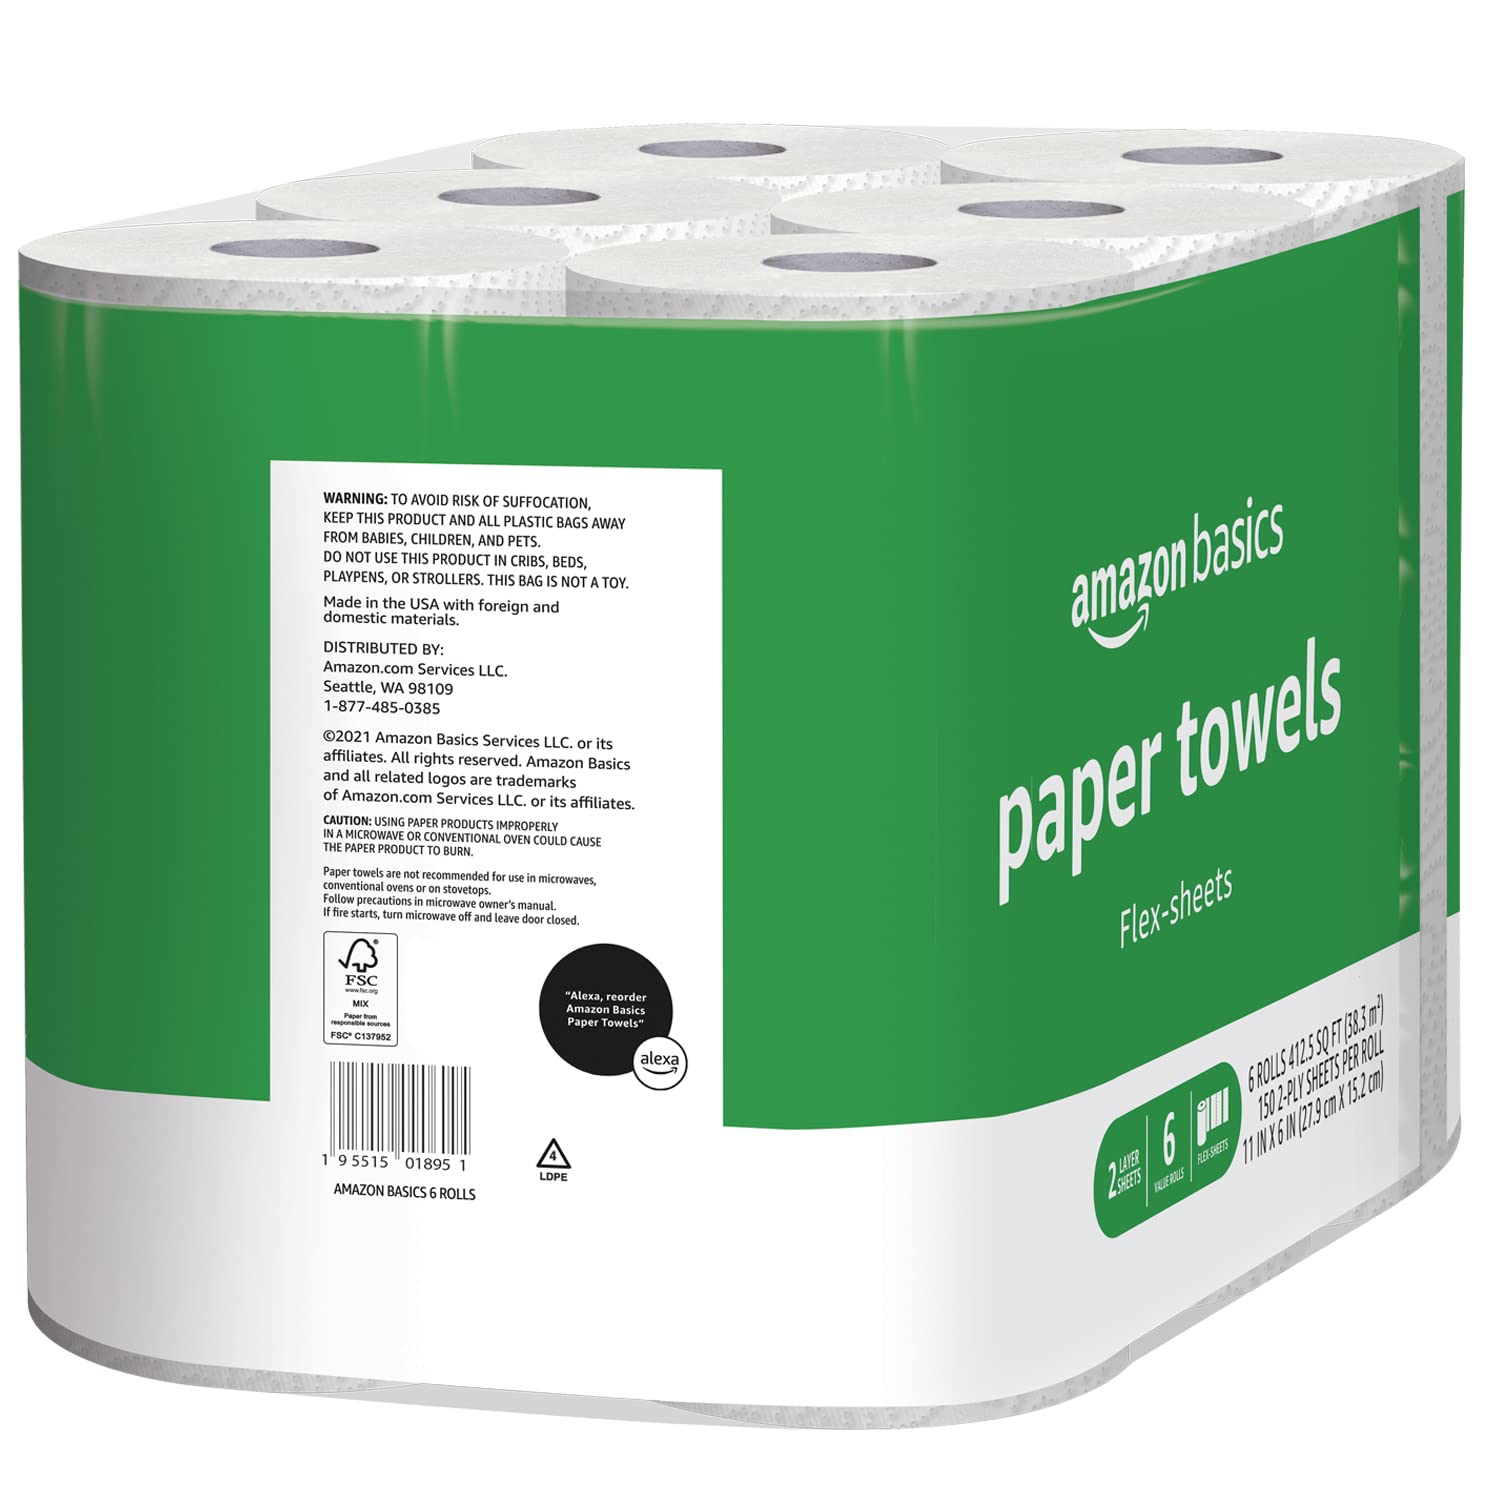 Amazon Basics 2-Ply Paper Towels, Flex-Sheets, 150 Sheets per Roll, 12 Rolls (2 Packs of 6), White